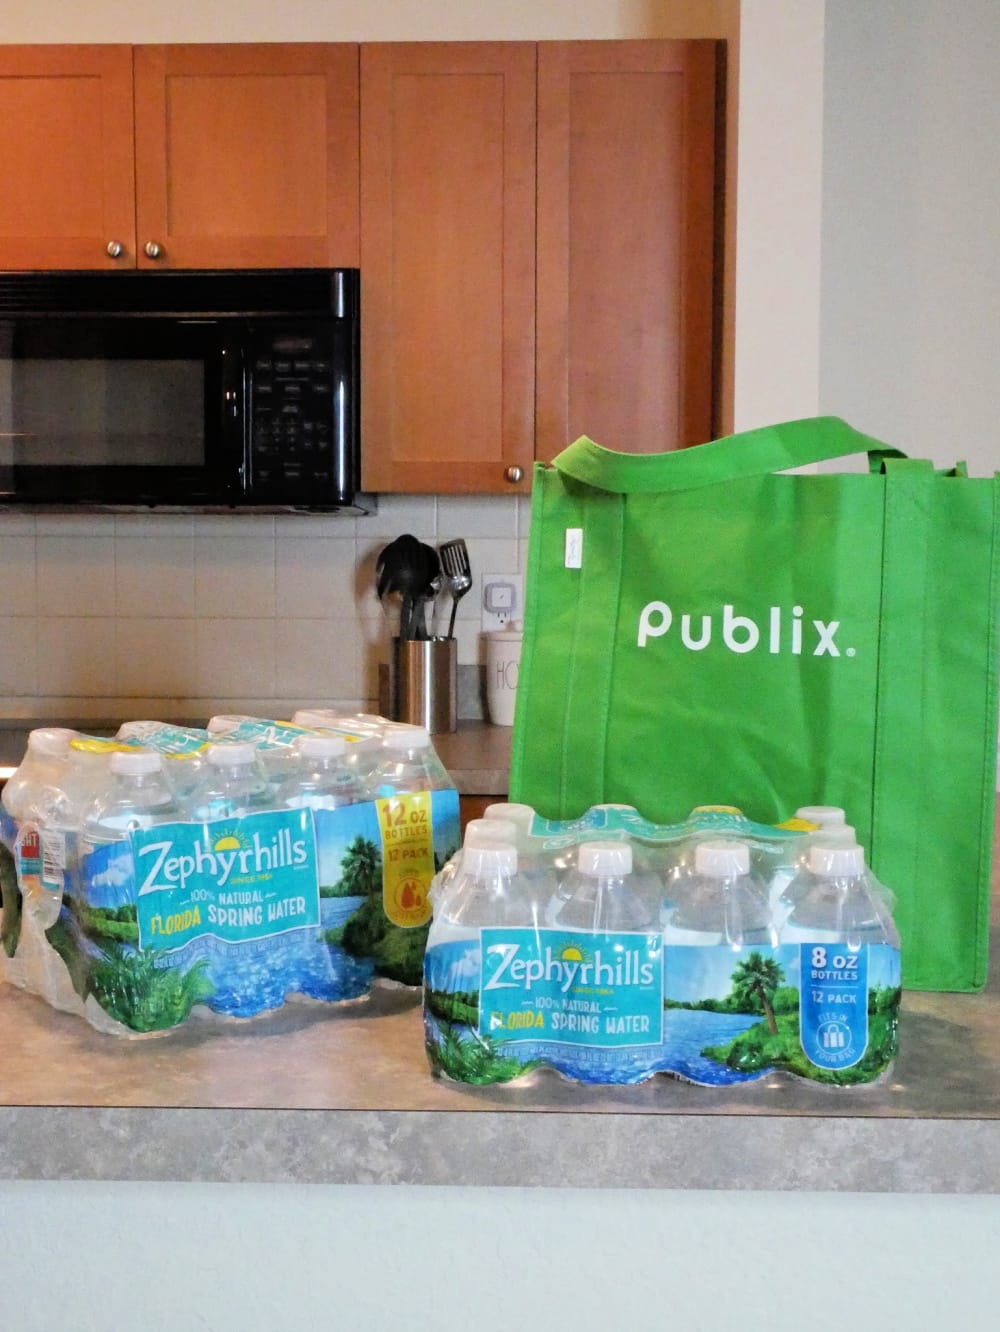 If you live in a coastal community, now is the time to prepare for hurricane season. Have an evacuation plan in place, and assemble a hurricane kit that will last your family for a minimum of 72 hours up to a week. Beginning June 15 through July 13, you can save over $30 on hurricane essentials at Publix.